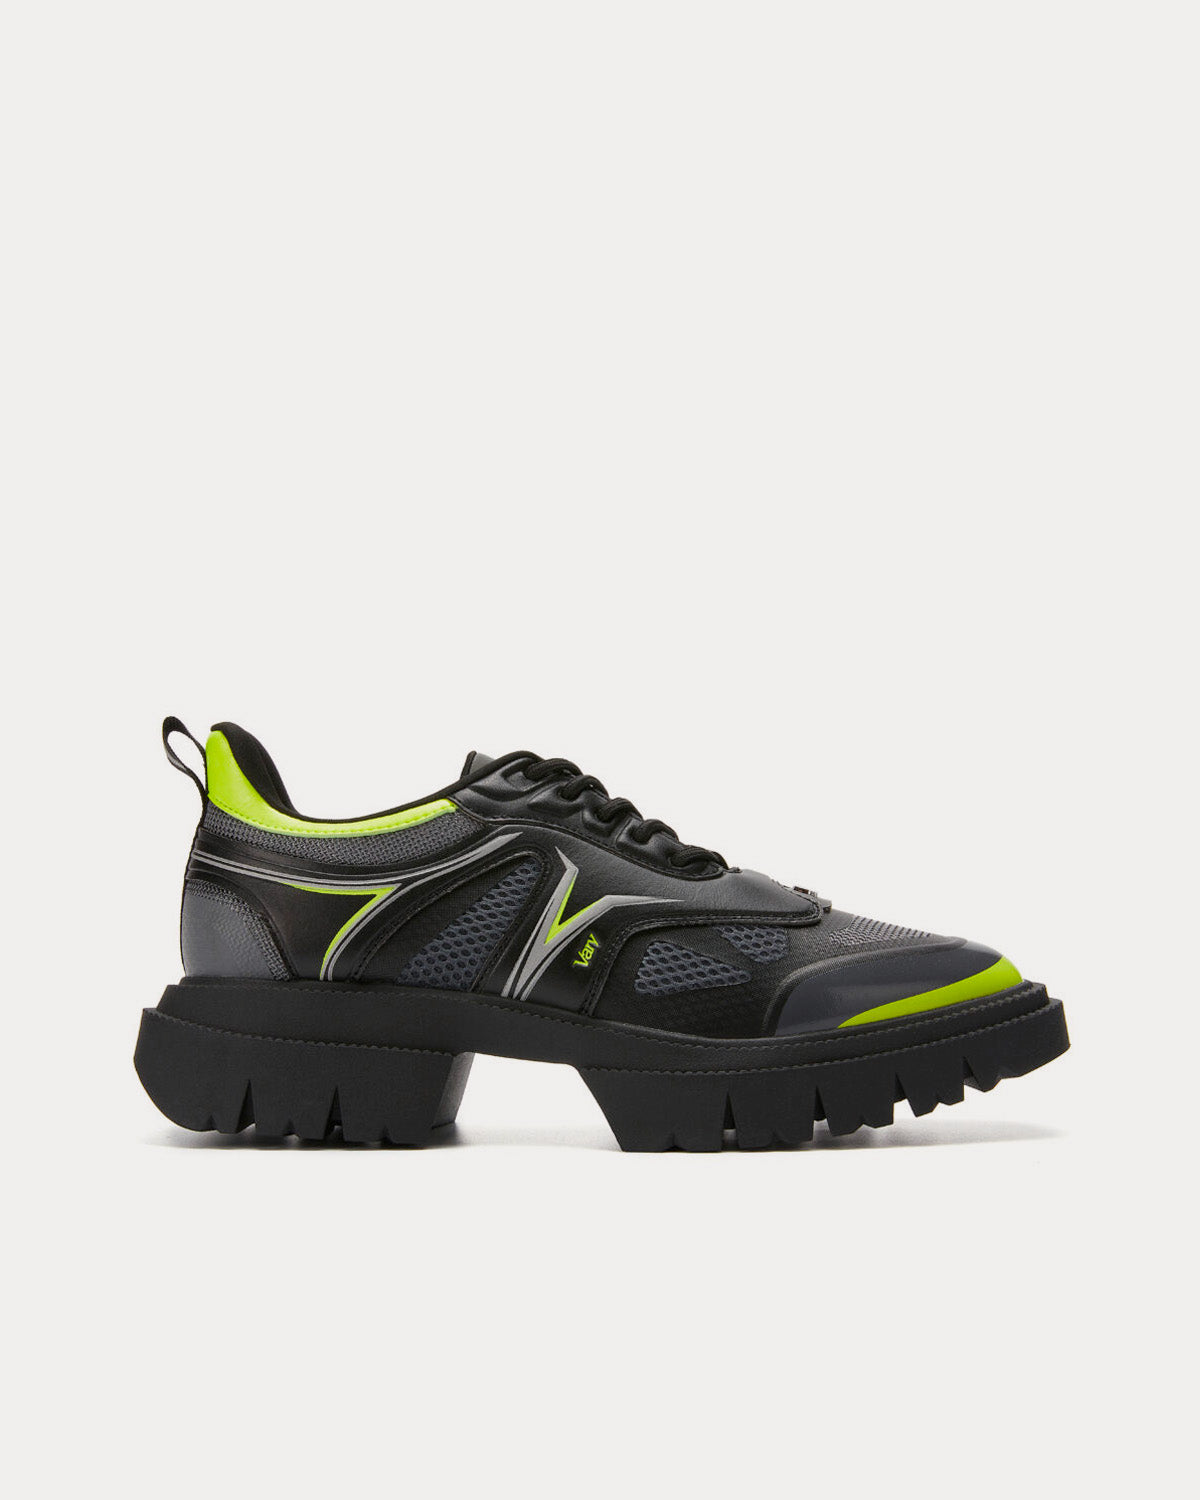 Untitlab - untitled#12 Vary Evening Primrose Low Top Sneakers